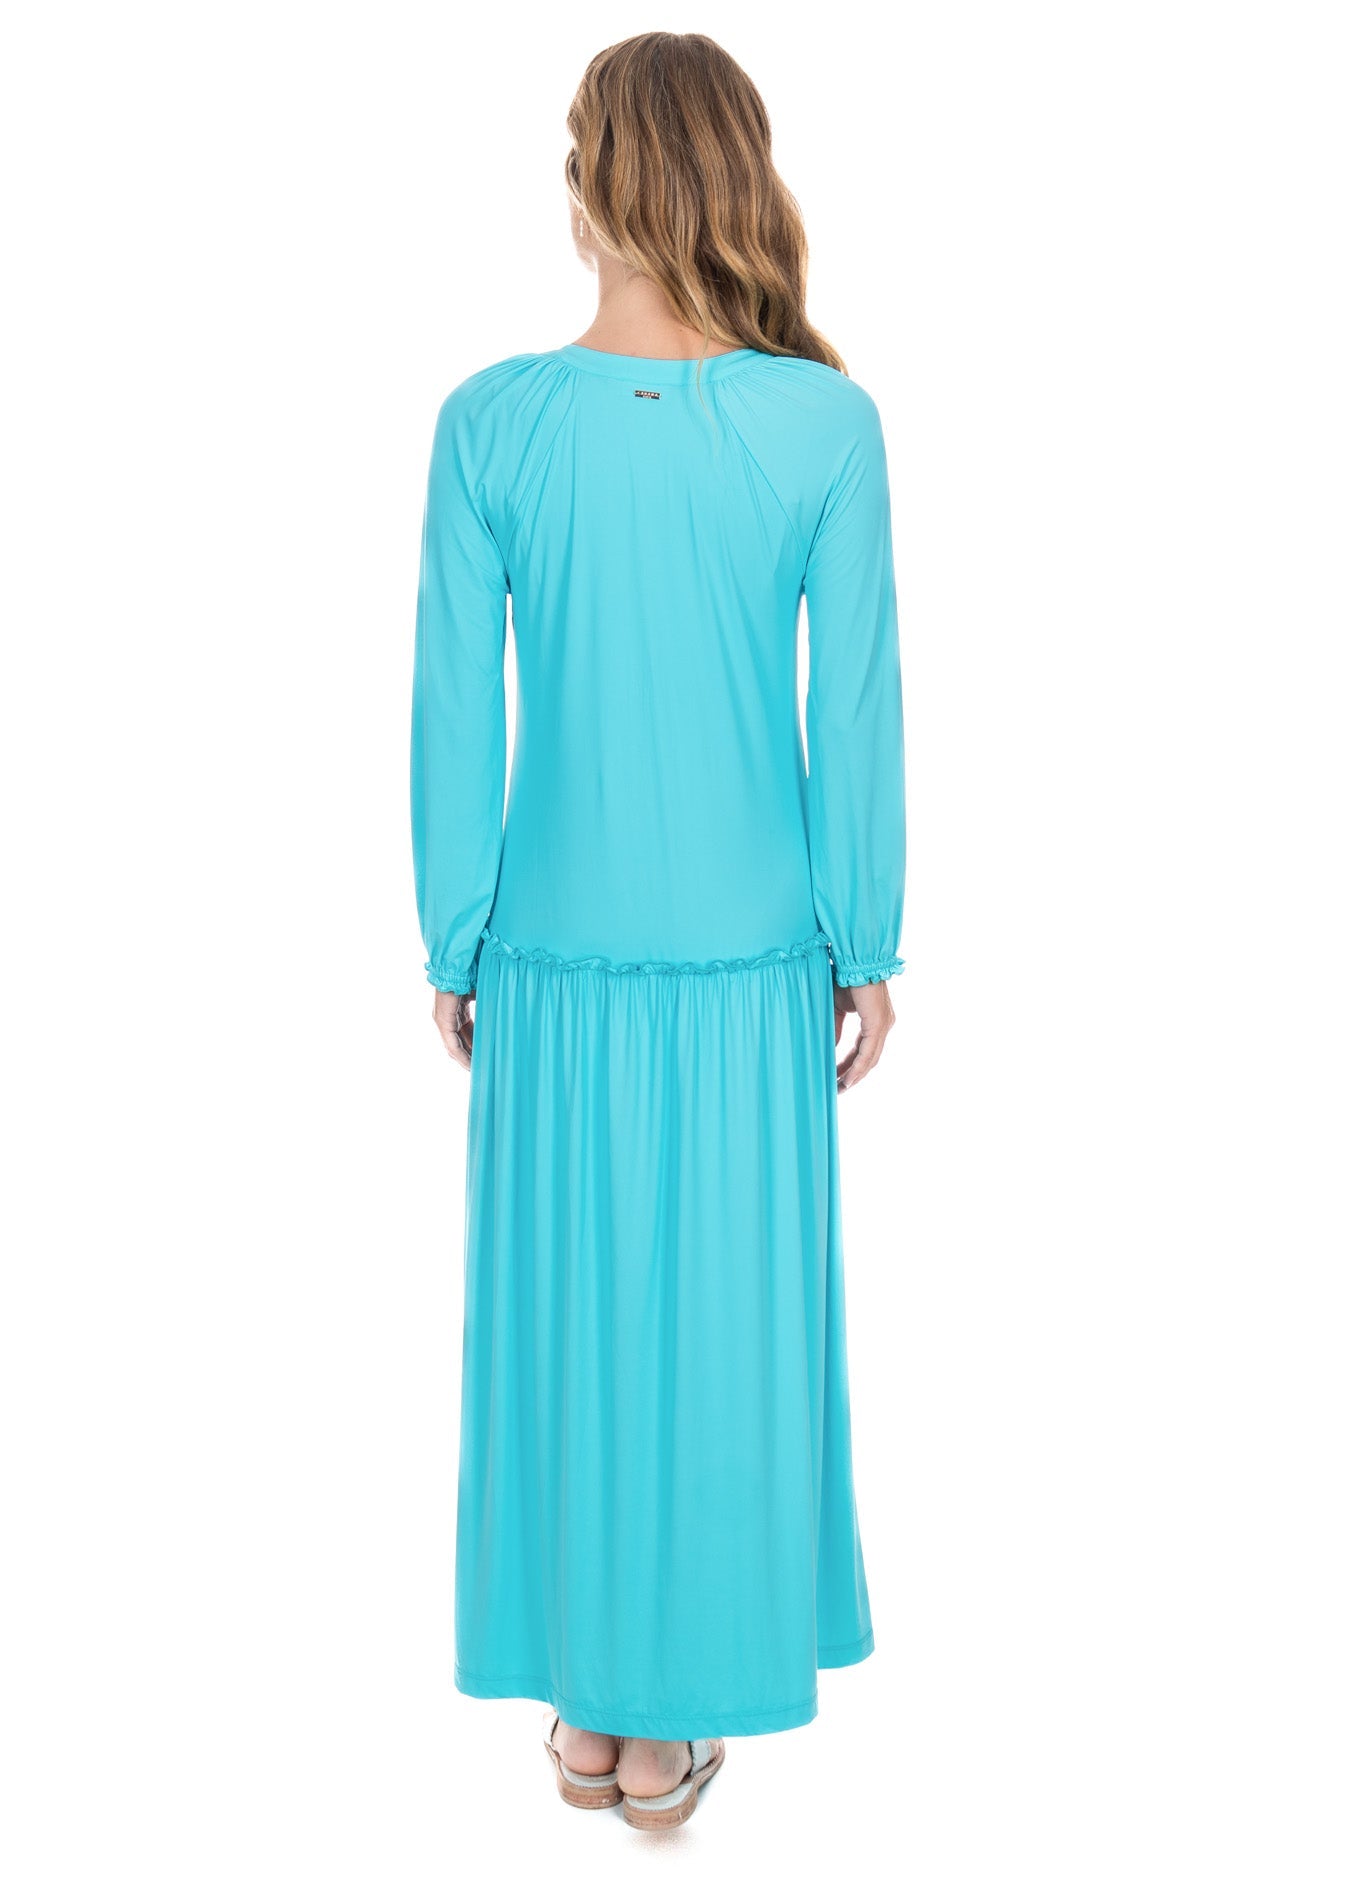 The back view of the UPF50+ Cabana Life Aqua Embroidered Tunic Maxi Dress showing the tunic cut and the flowing hem. 